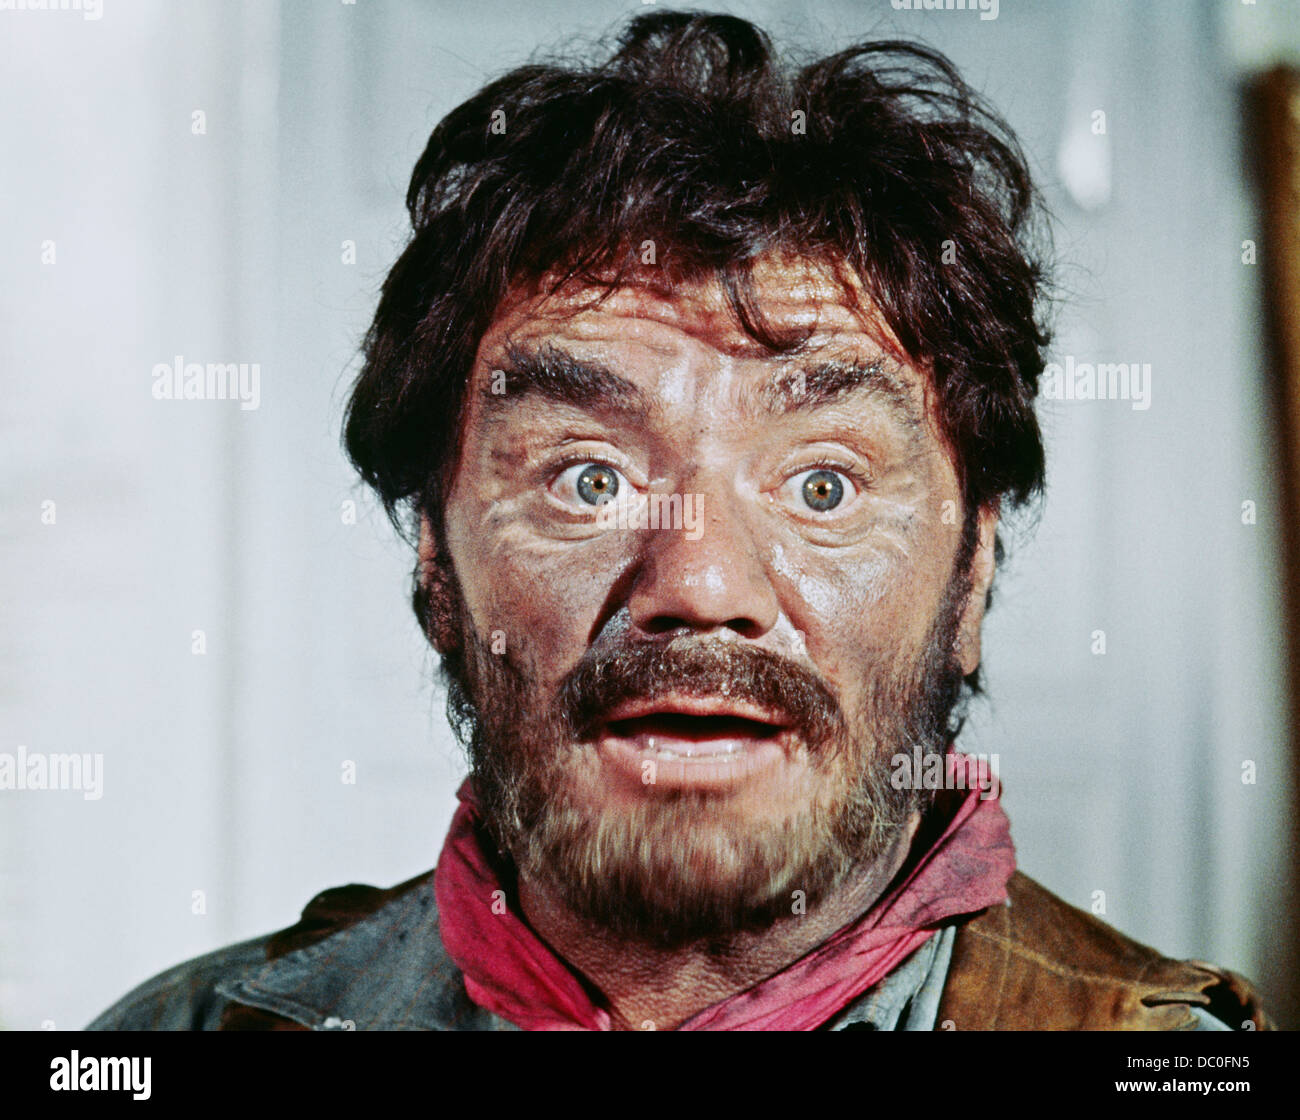 1960s PORTRAIT OF ACTOR ERNEST BORGNINE IN CHARACTER COSTUME Stock Photo